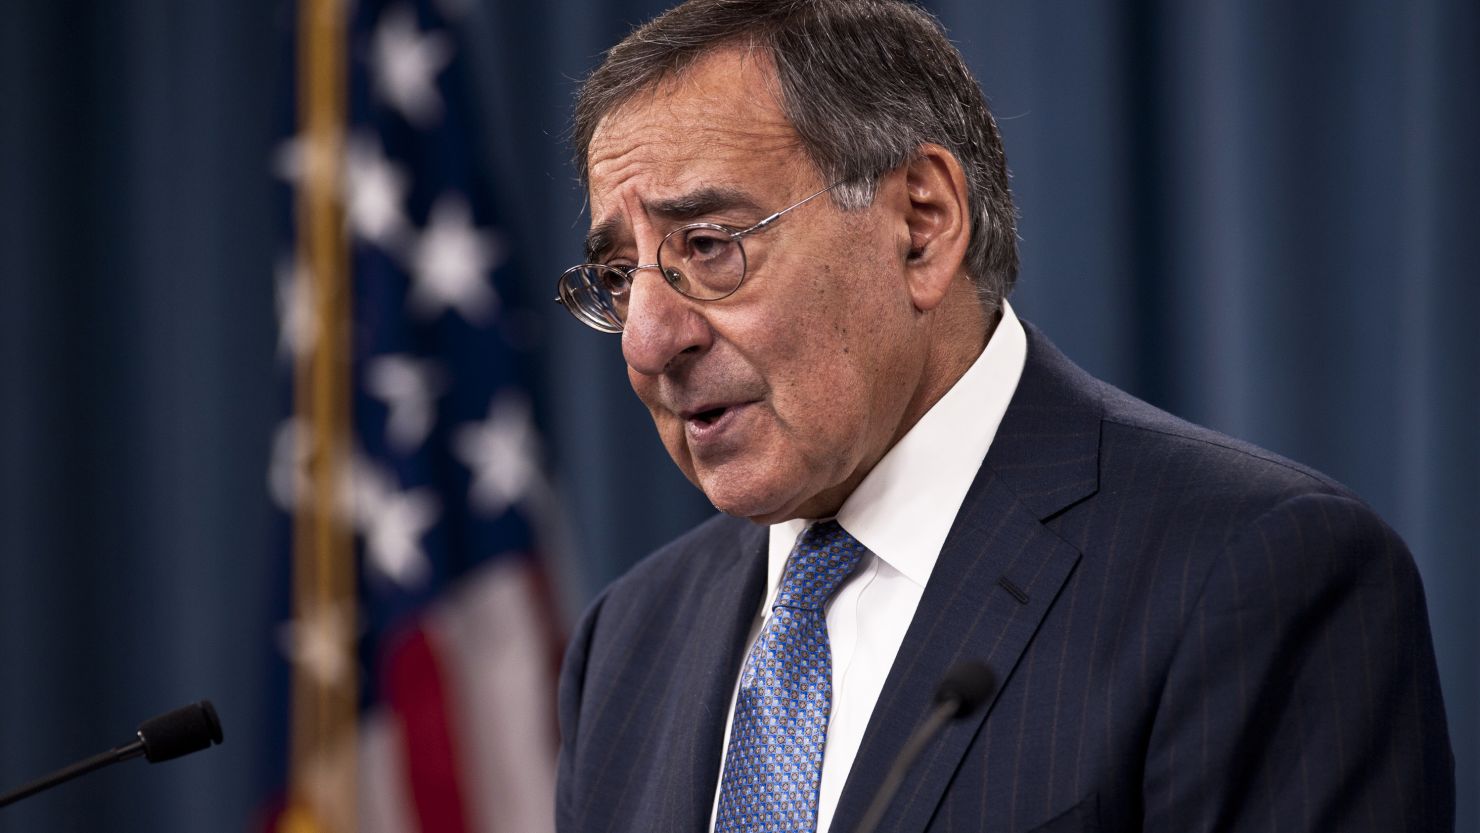 "The United States military has a zero-tolerance policy for sexual assault," Defense Secretary Leon Panetta said Wednesday.